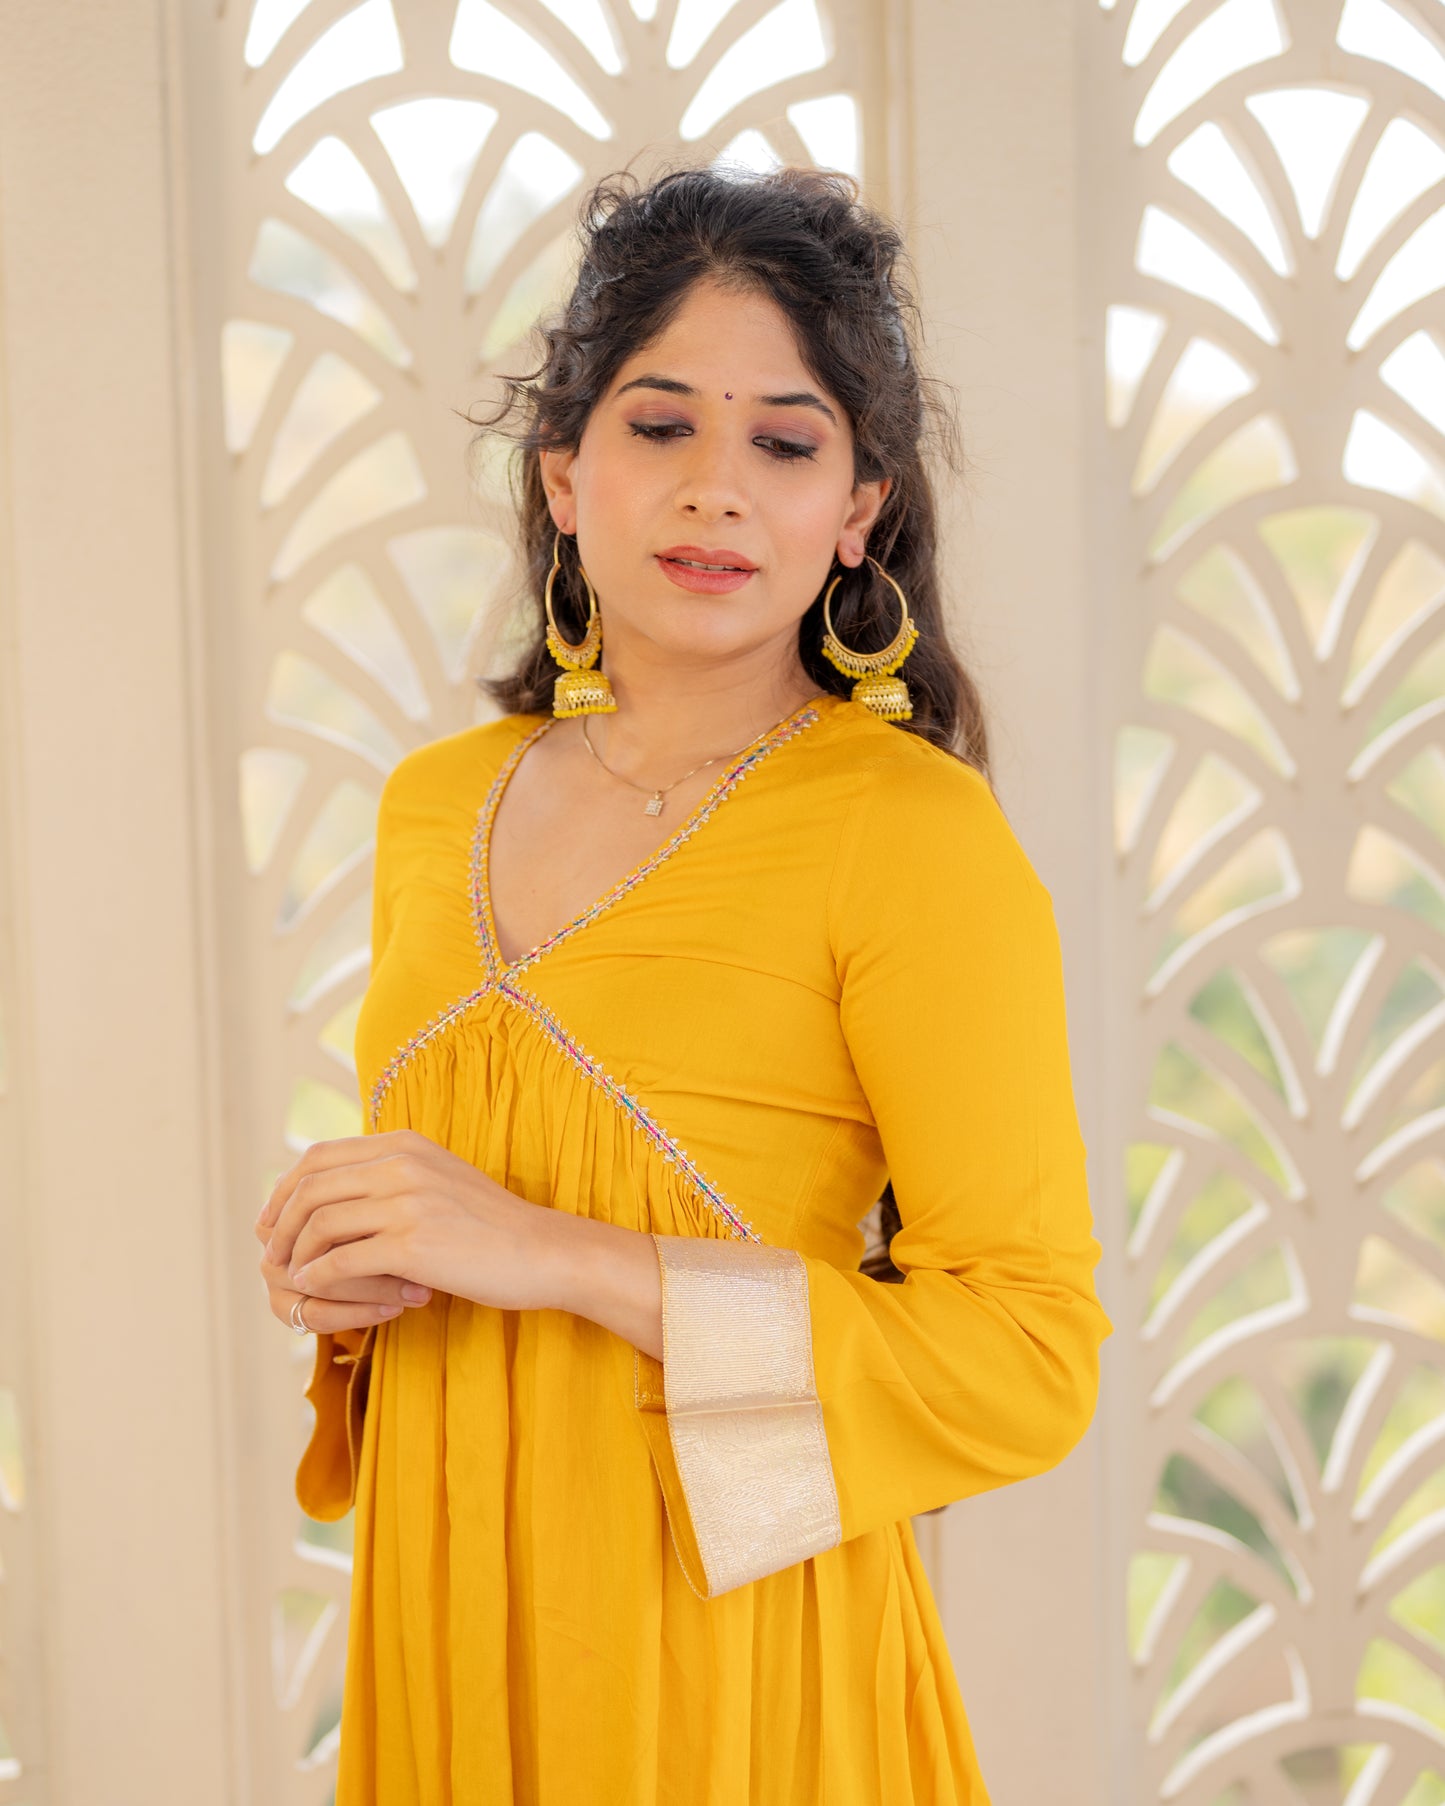 Mustard Yellow Embroided Empire Cotton  Suit Set